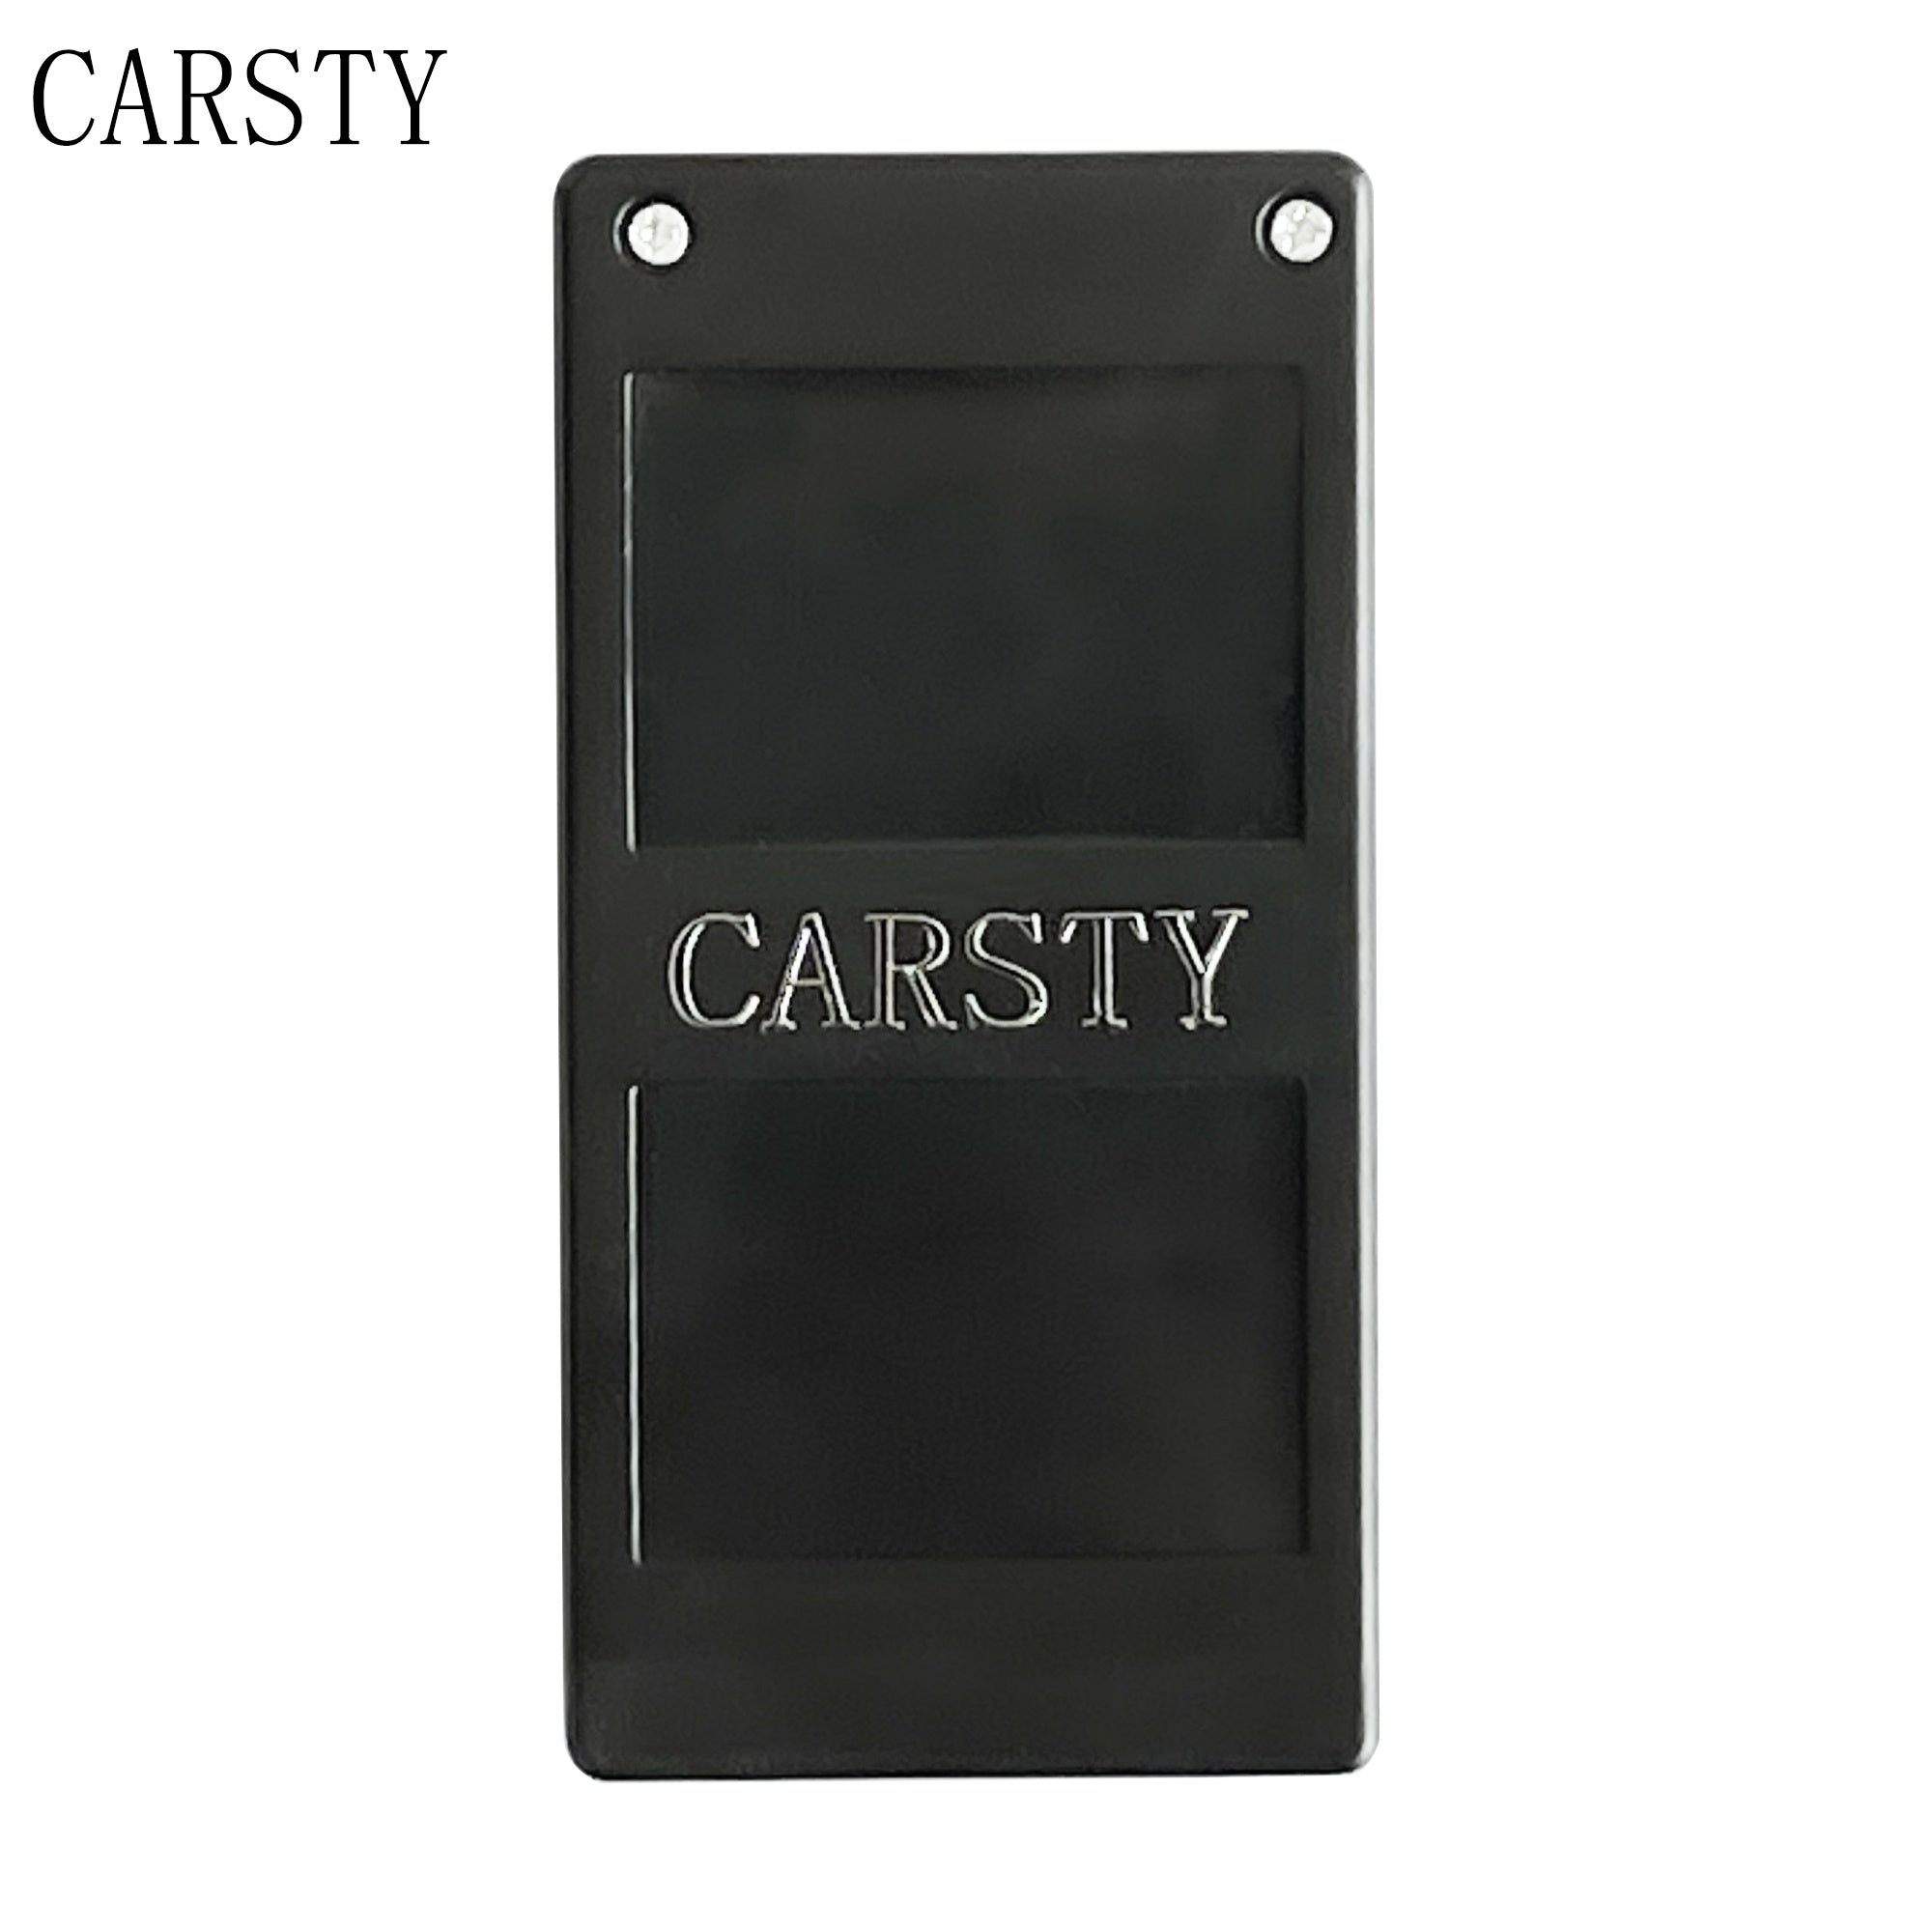 CARSTY Vibration Induction Alarm Bicycle Anti-theft Alarm Remote Control Wireless Electric Vehicle Bicycle Installation Free